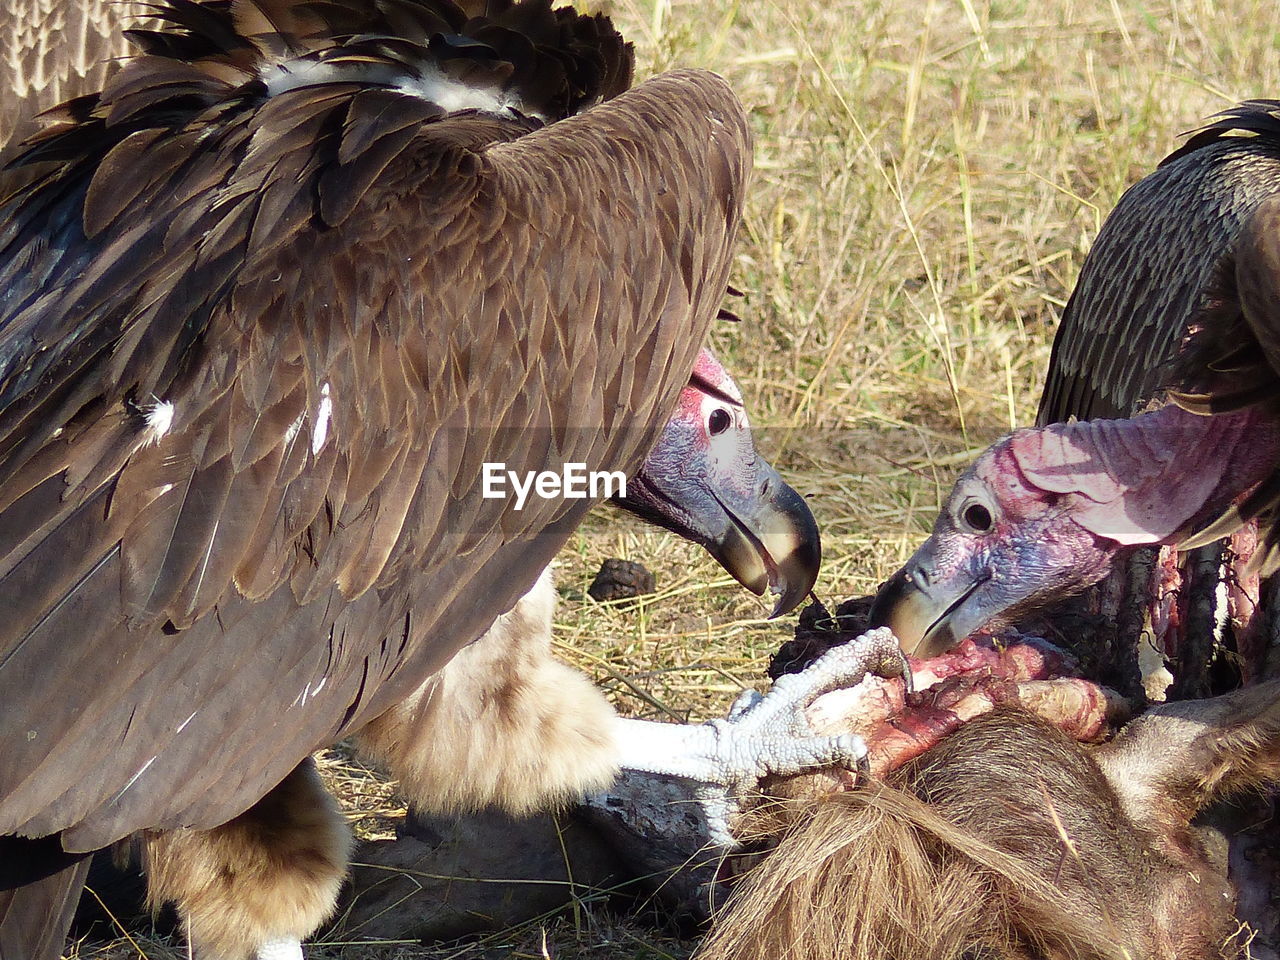 Close-up of vultures eating dead animal